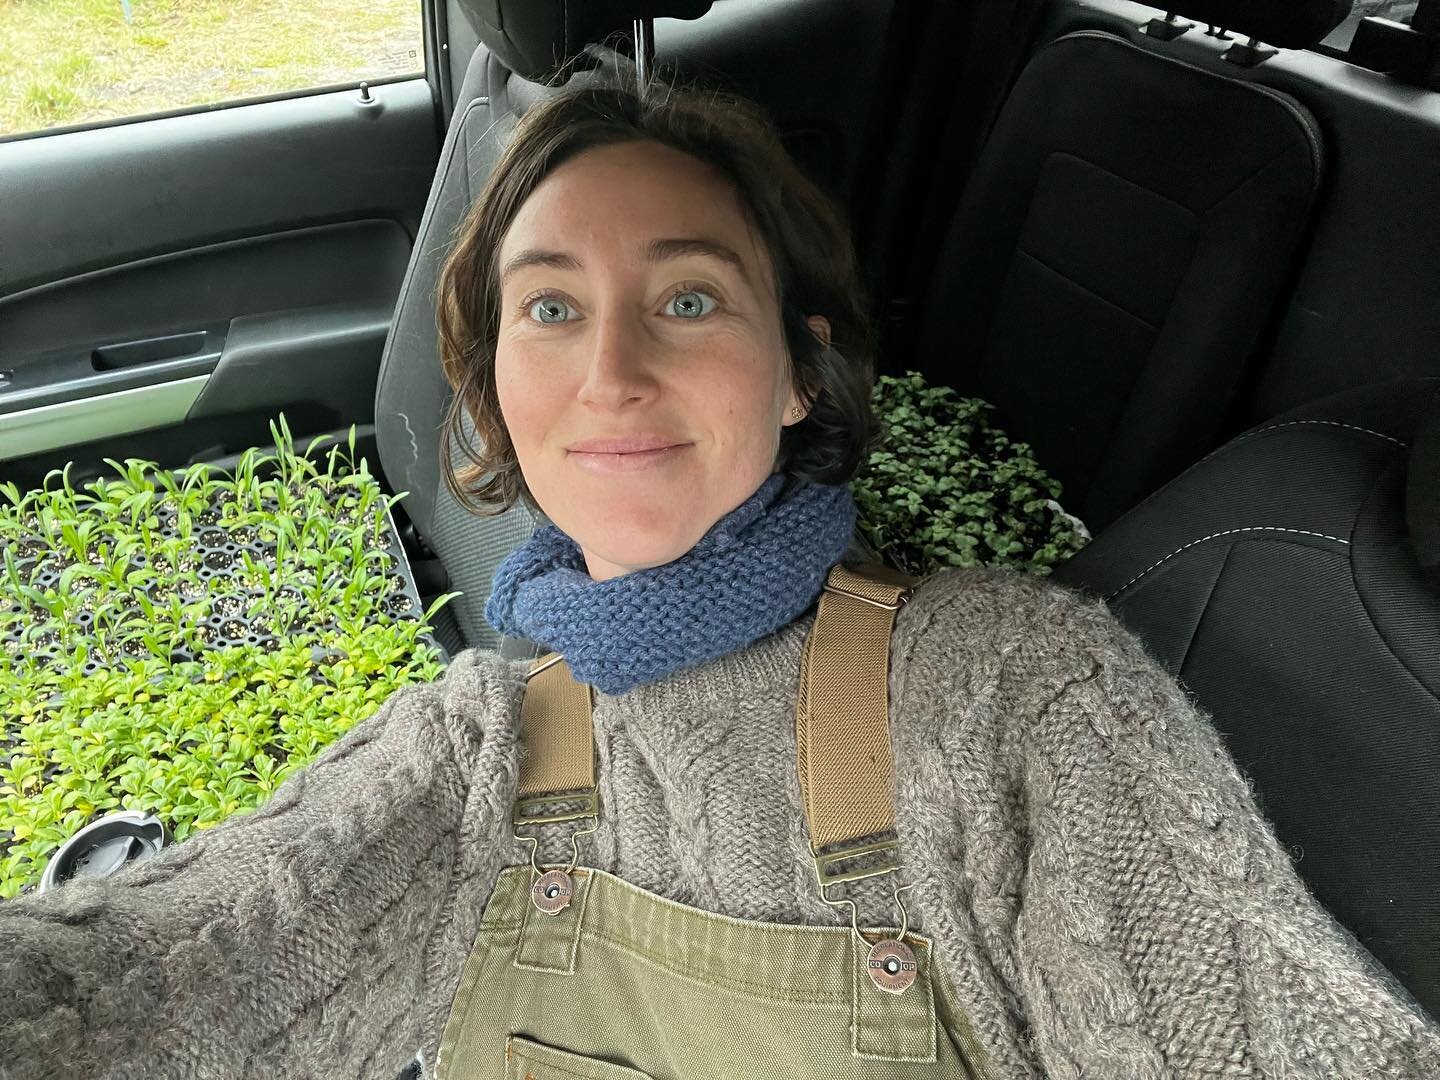 We&rsquo;re baaack!!! Getting a very slow start to the season, but oh what a season it will be! Thank you @seachangeflower for taking care of my seedlings while I visited family on the west coast. Just planted out about 1,000 little nuggets of hope i